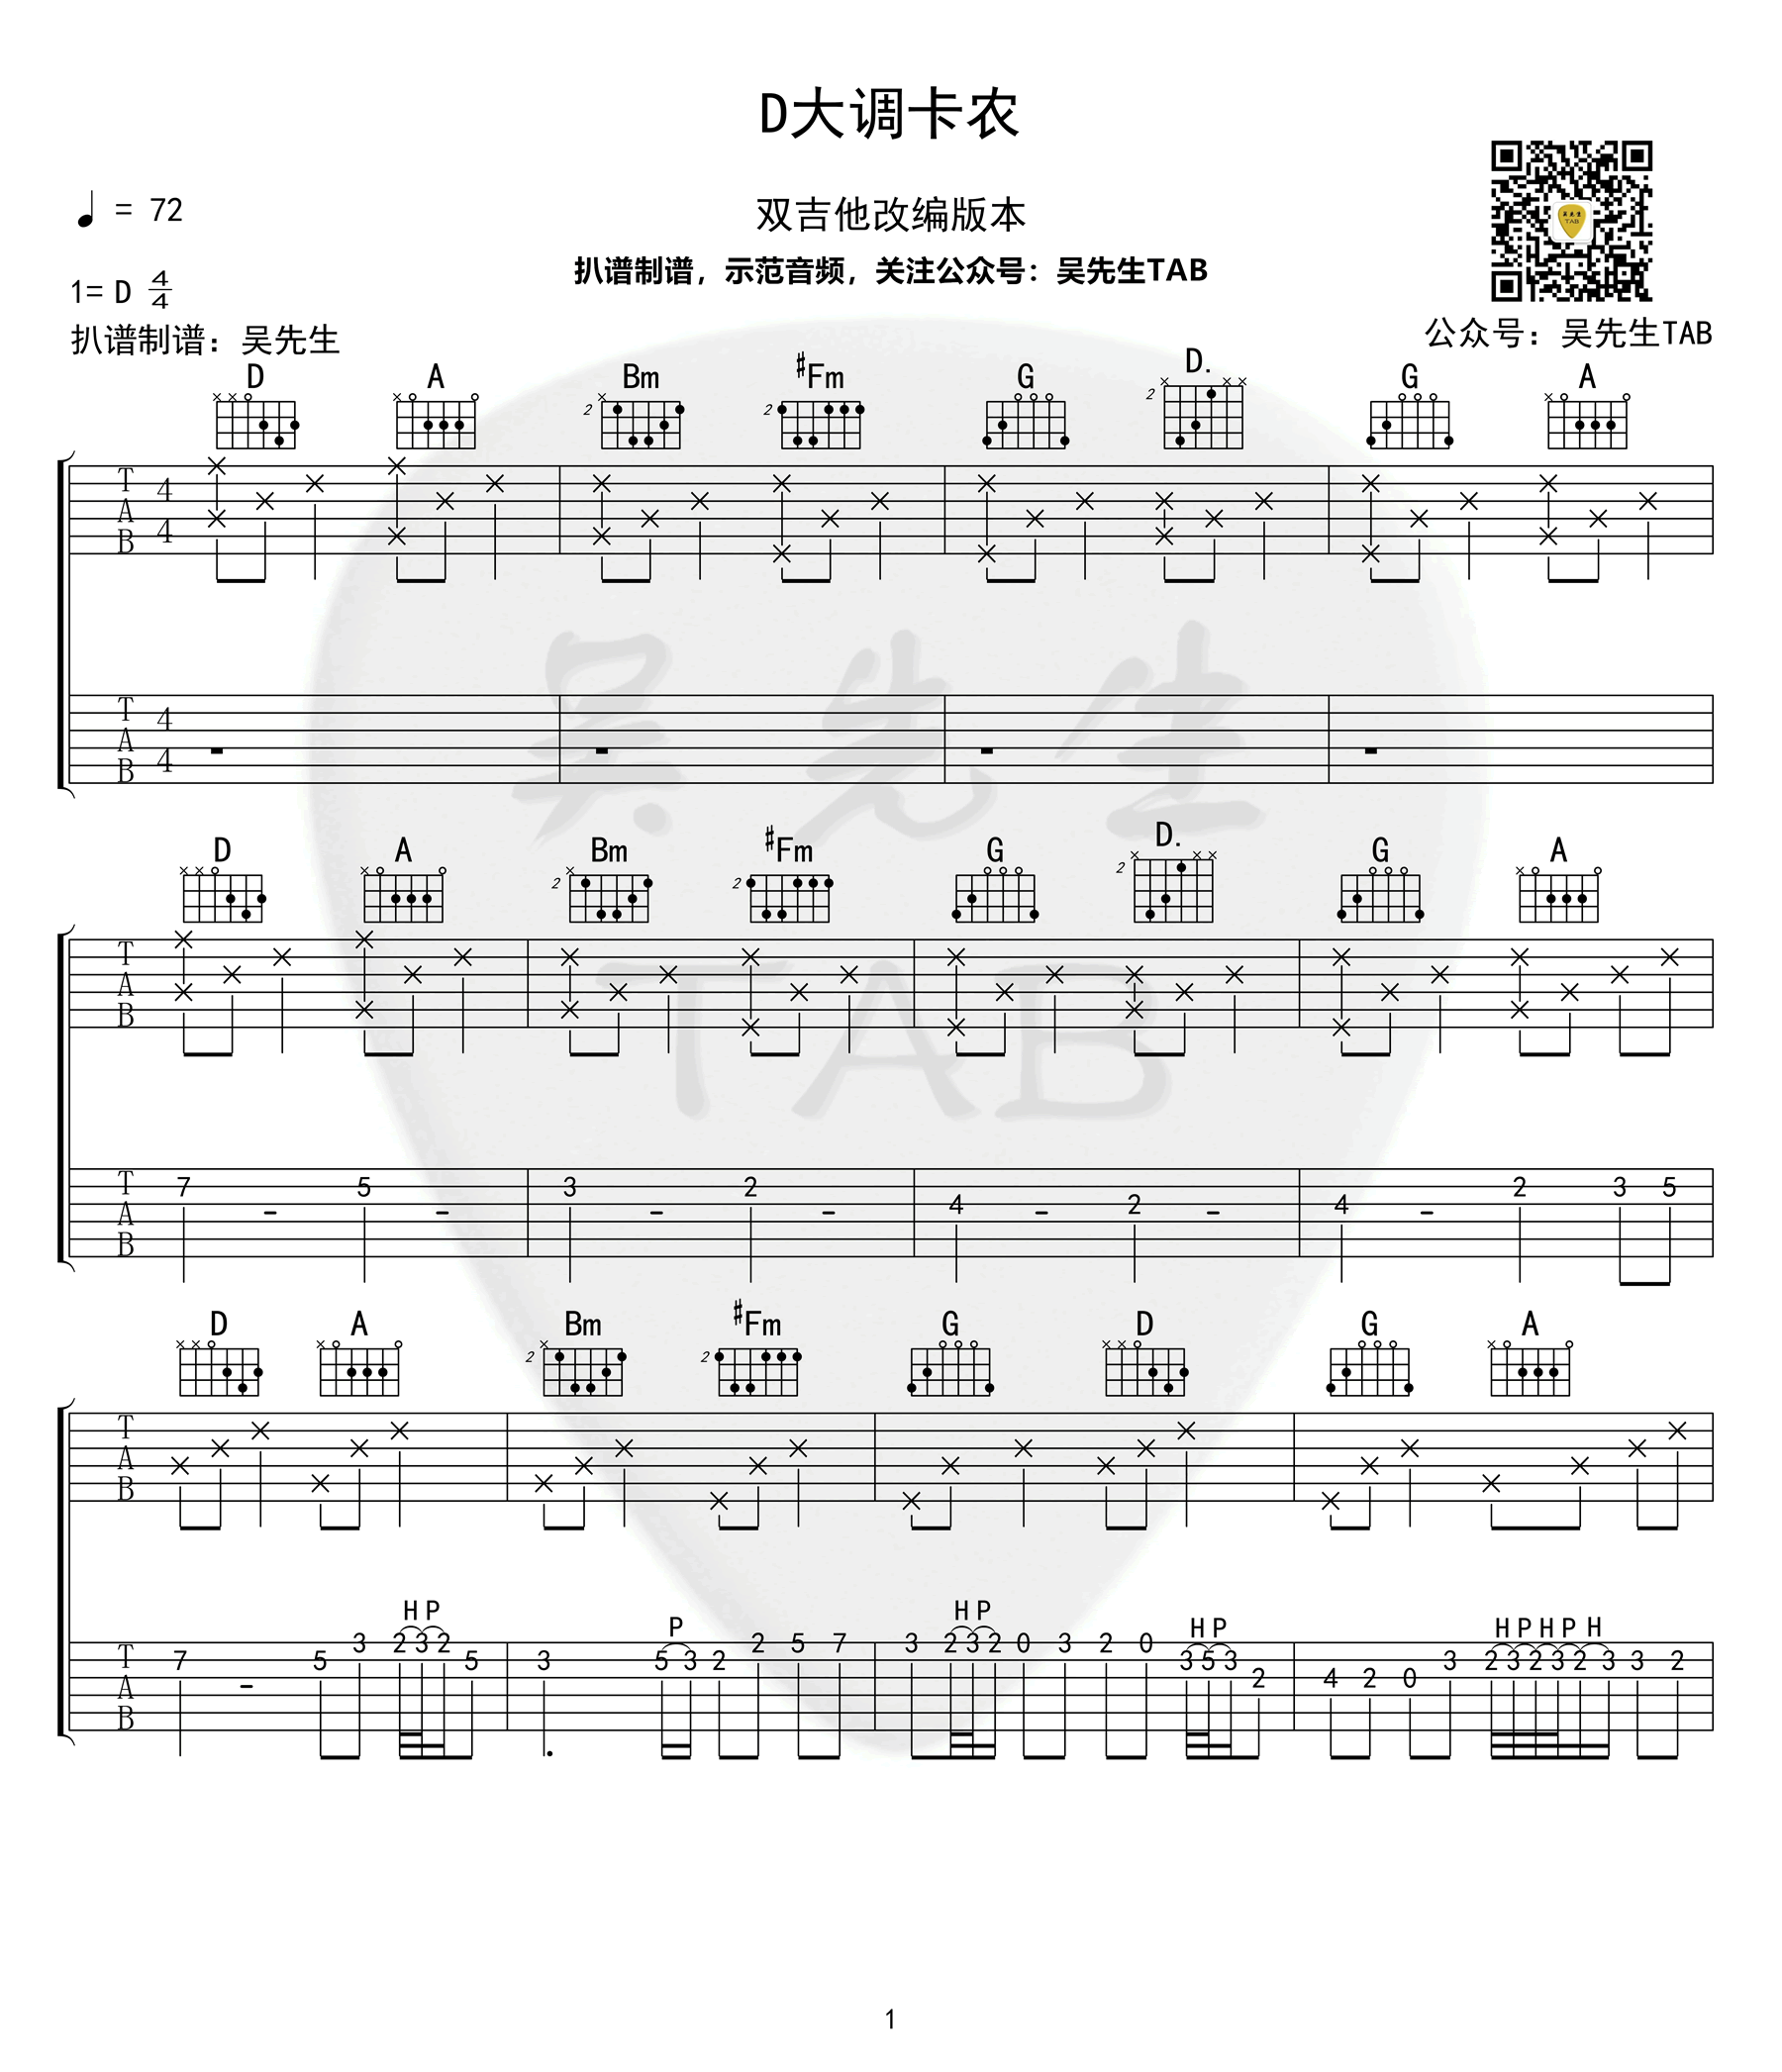 D大调卡农吉他谱_双吉他版本_Canon and Gigue in D1